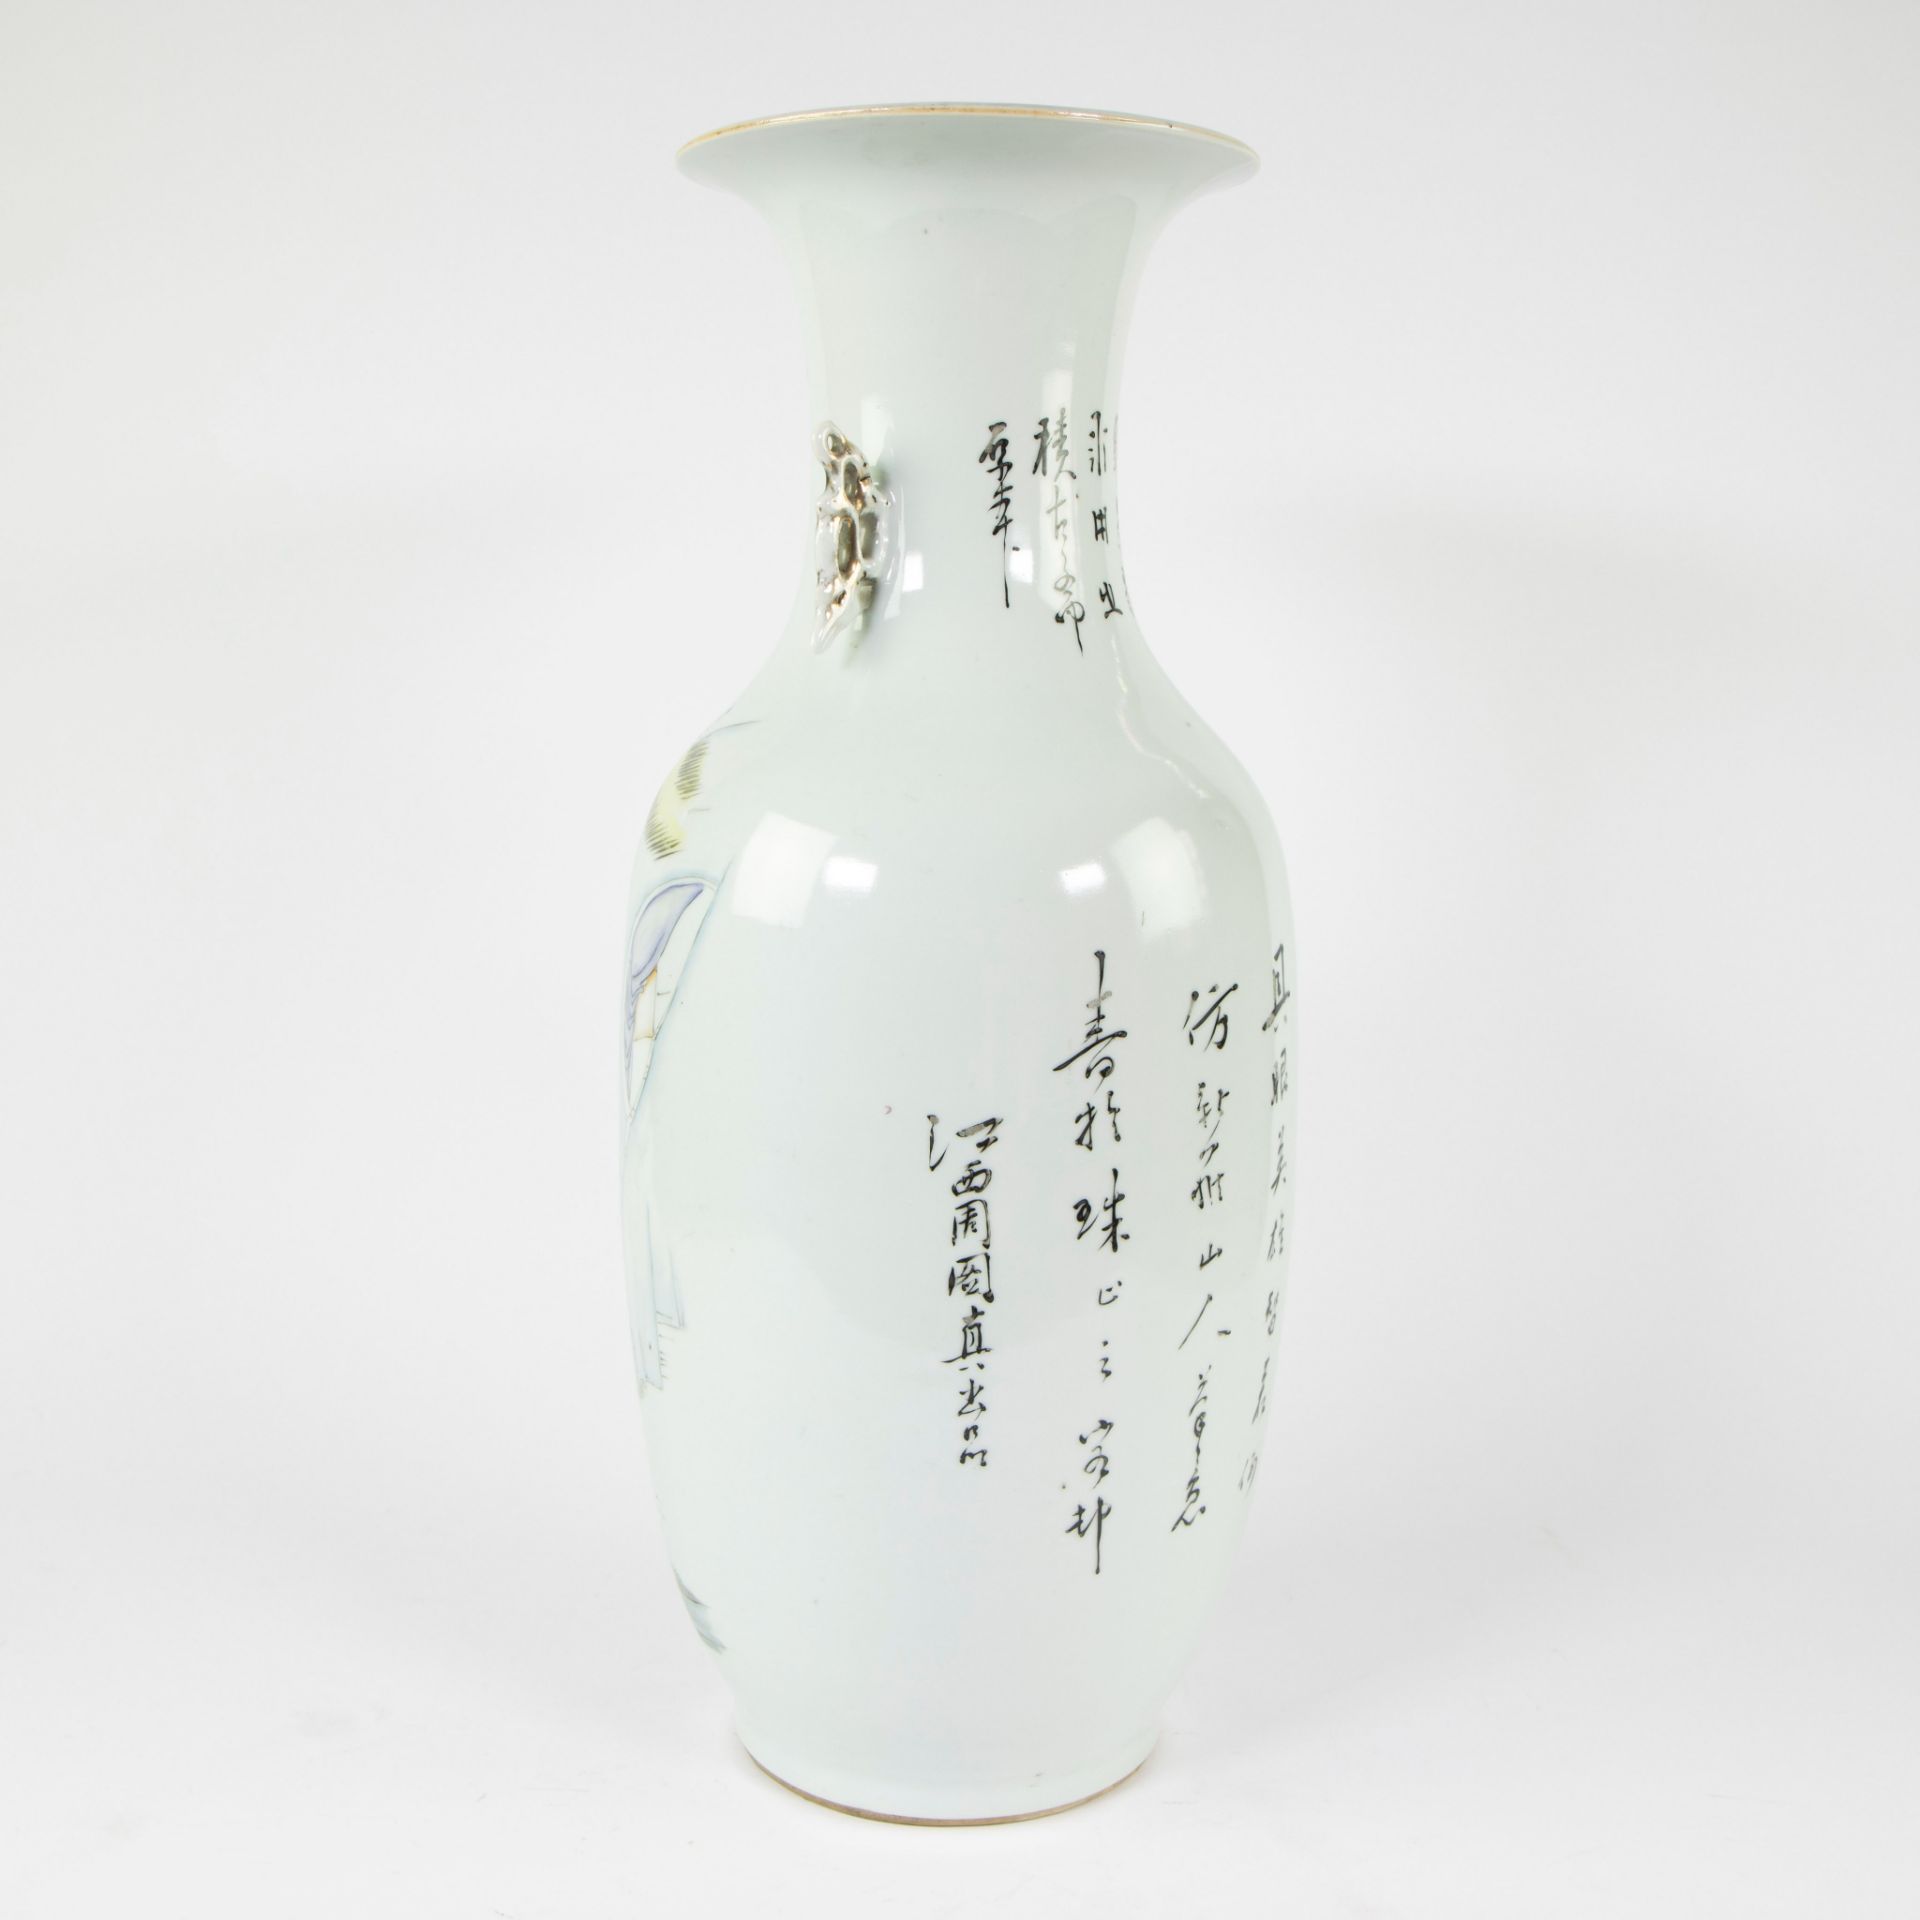 19th century Chinese famille rose vase decorated with figures and Chinese texts - Image 4 of 11